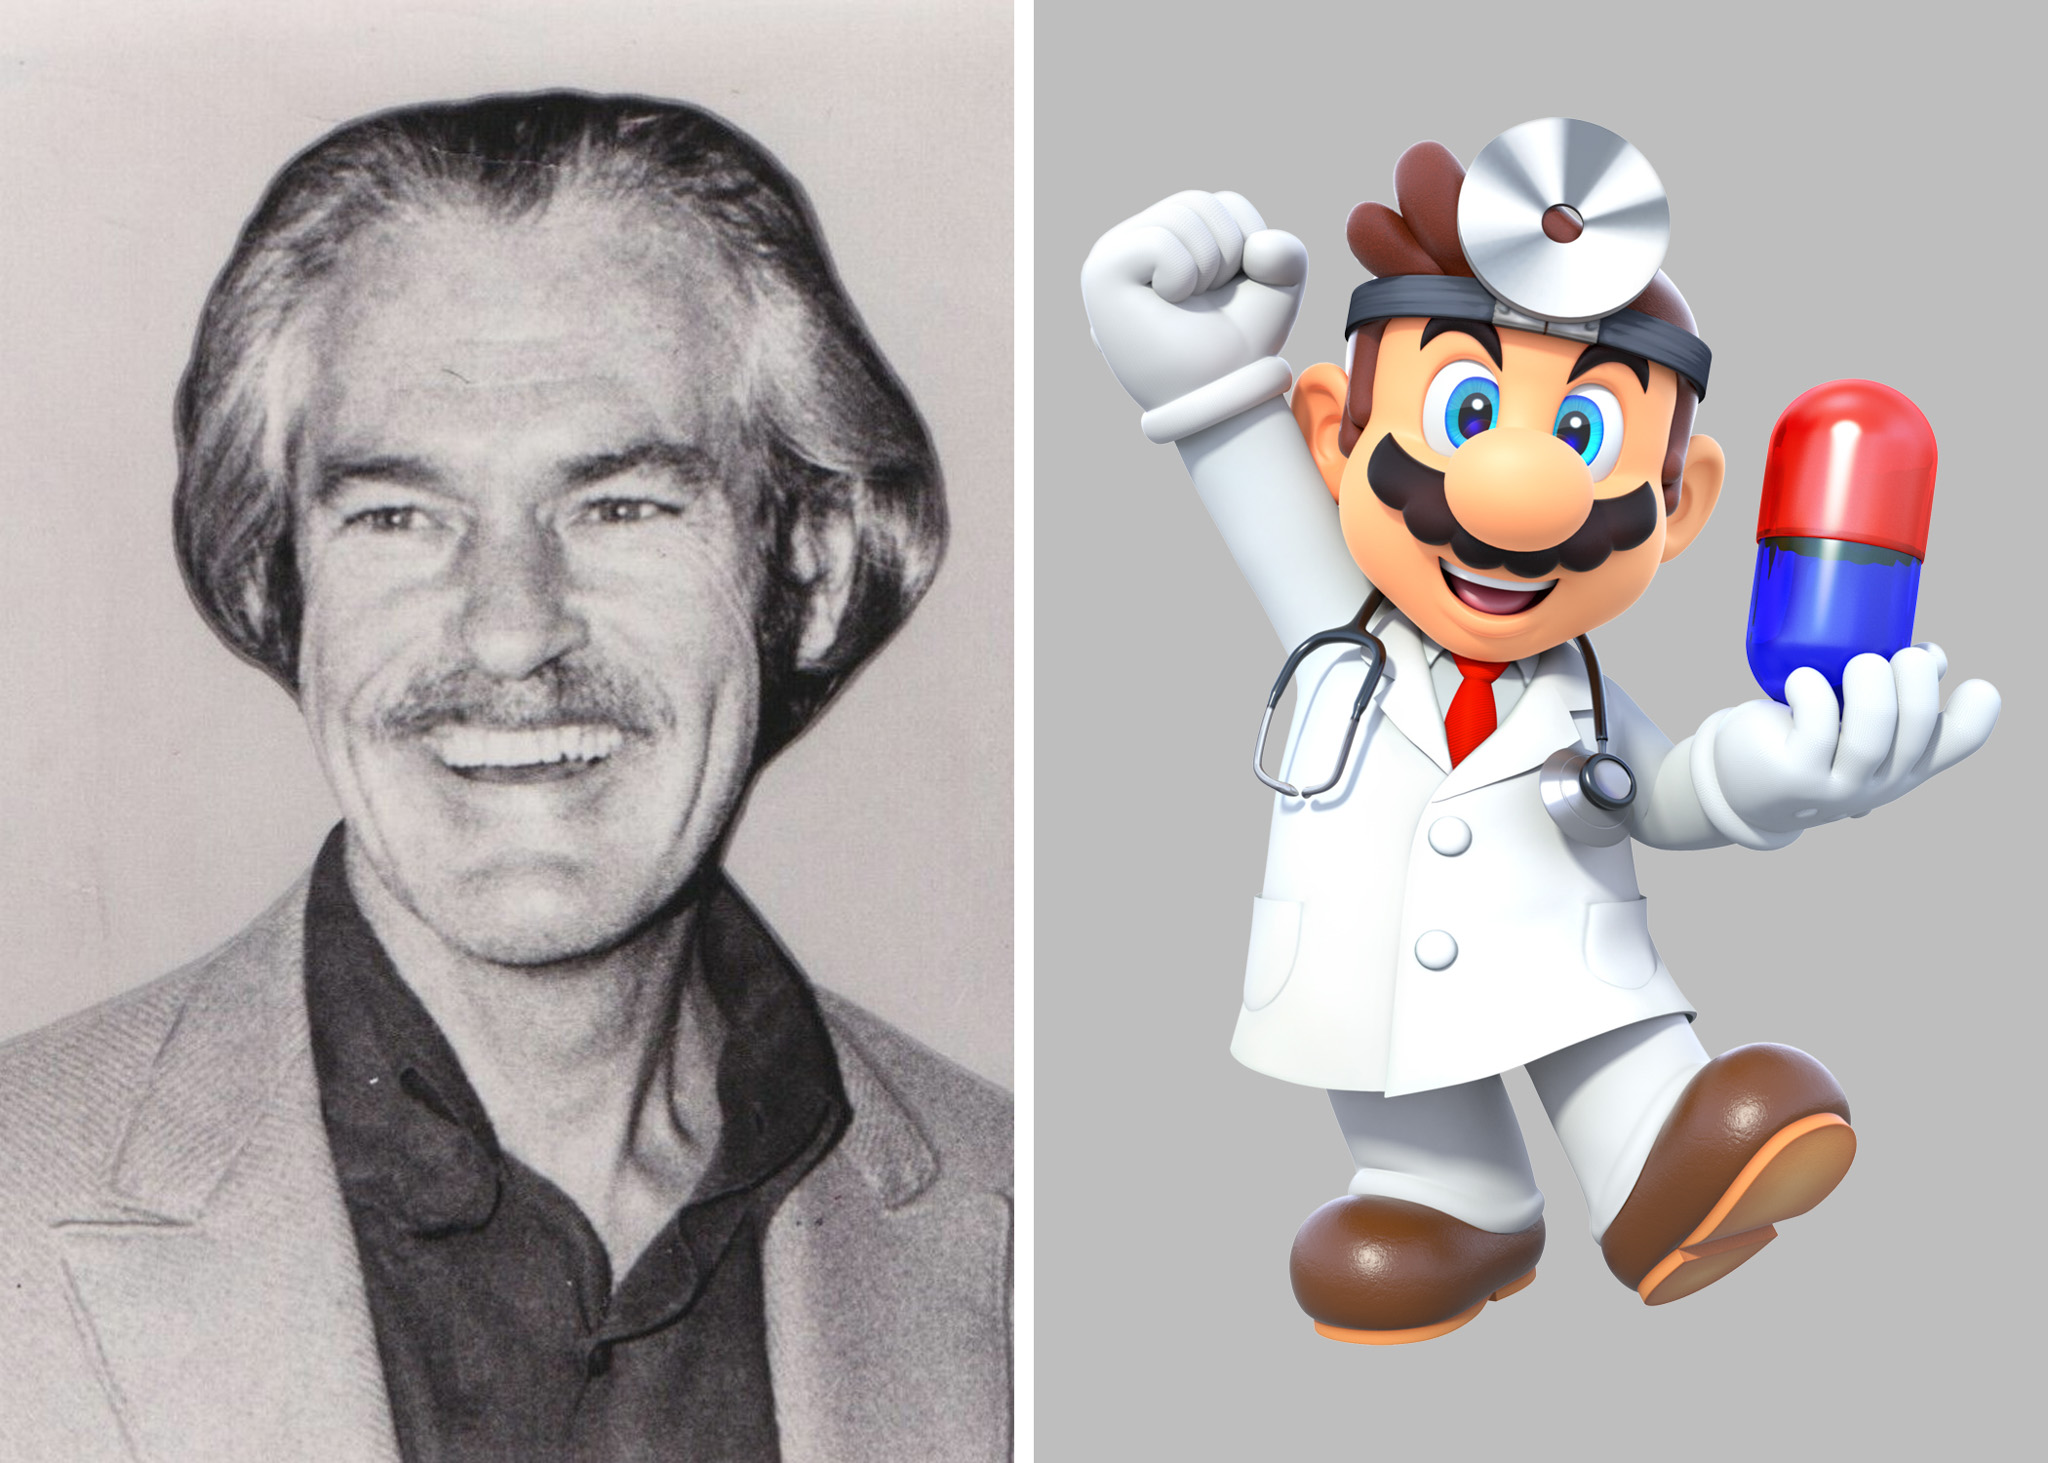 The image has a black-and-white photo of a smiling man on the left and a colorful cartoon doctor holding a red and blue pill on the right.